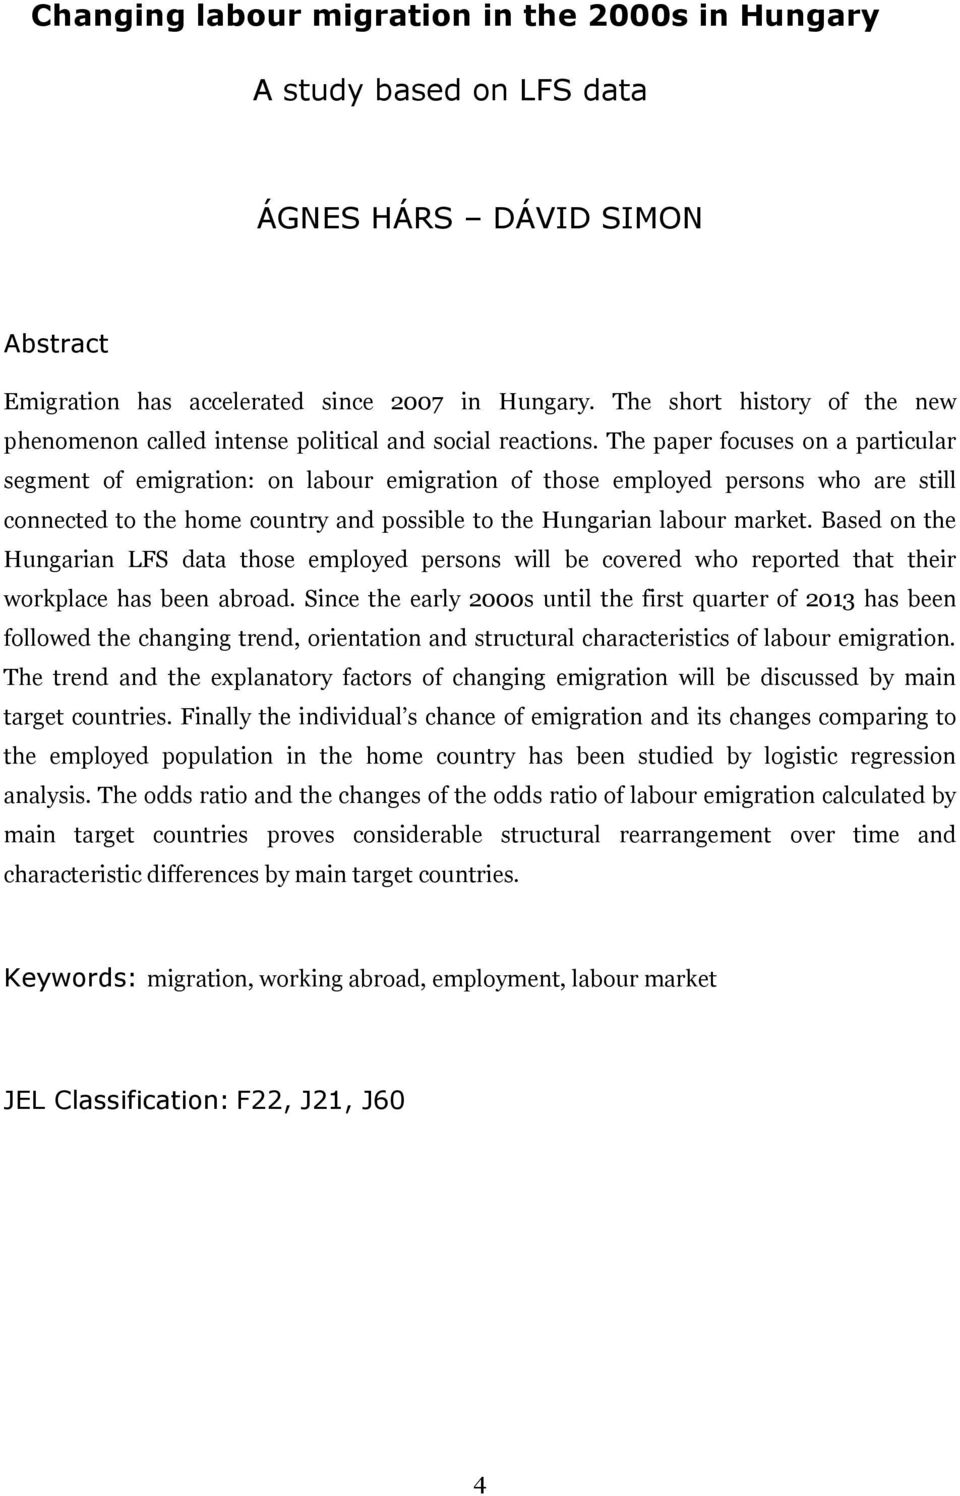 The paper focuses on a particular segment of emigration: on labour emigration of those employed persons who are still connected to the home country and possible to the Hungarian labour market.